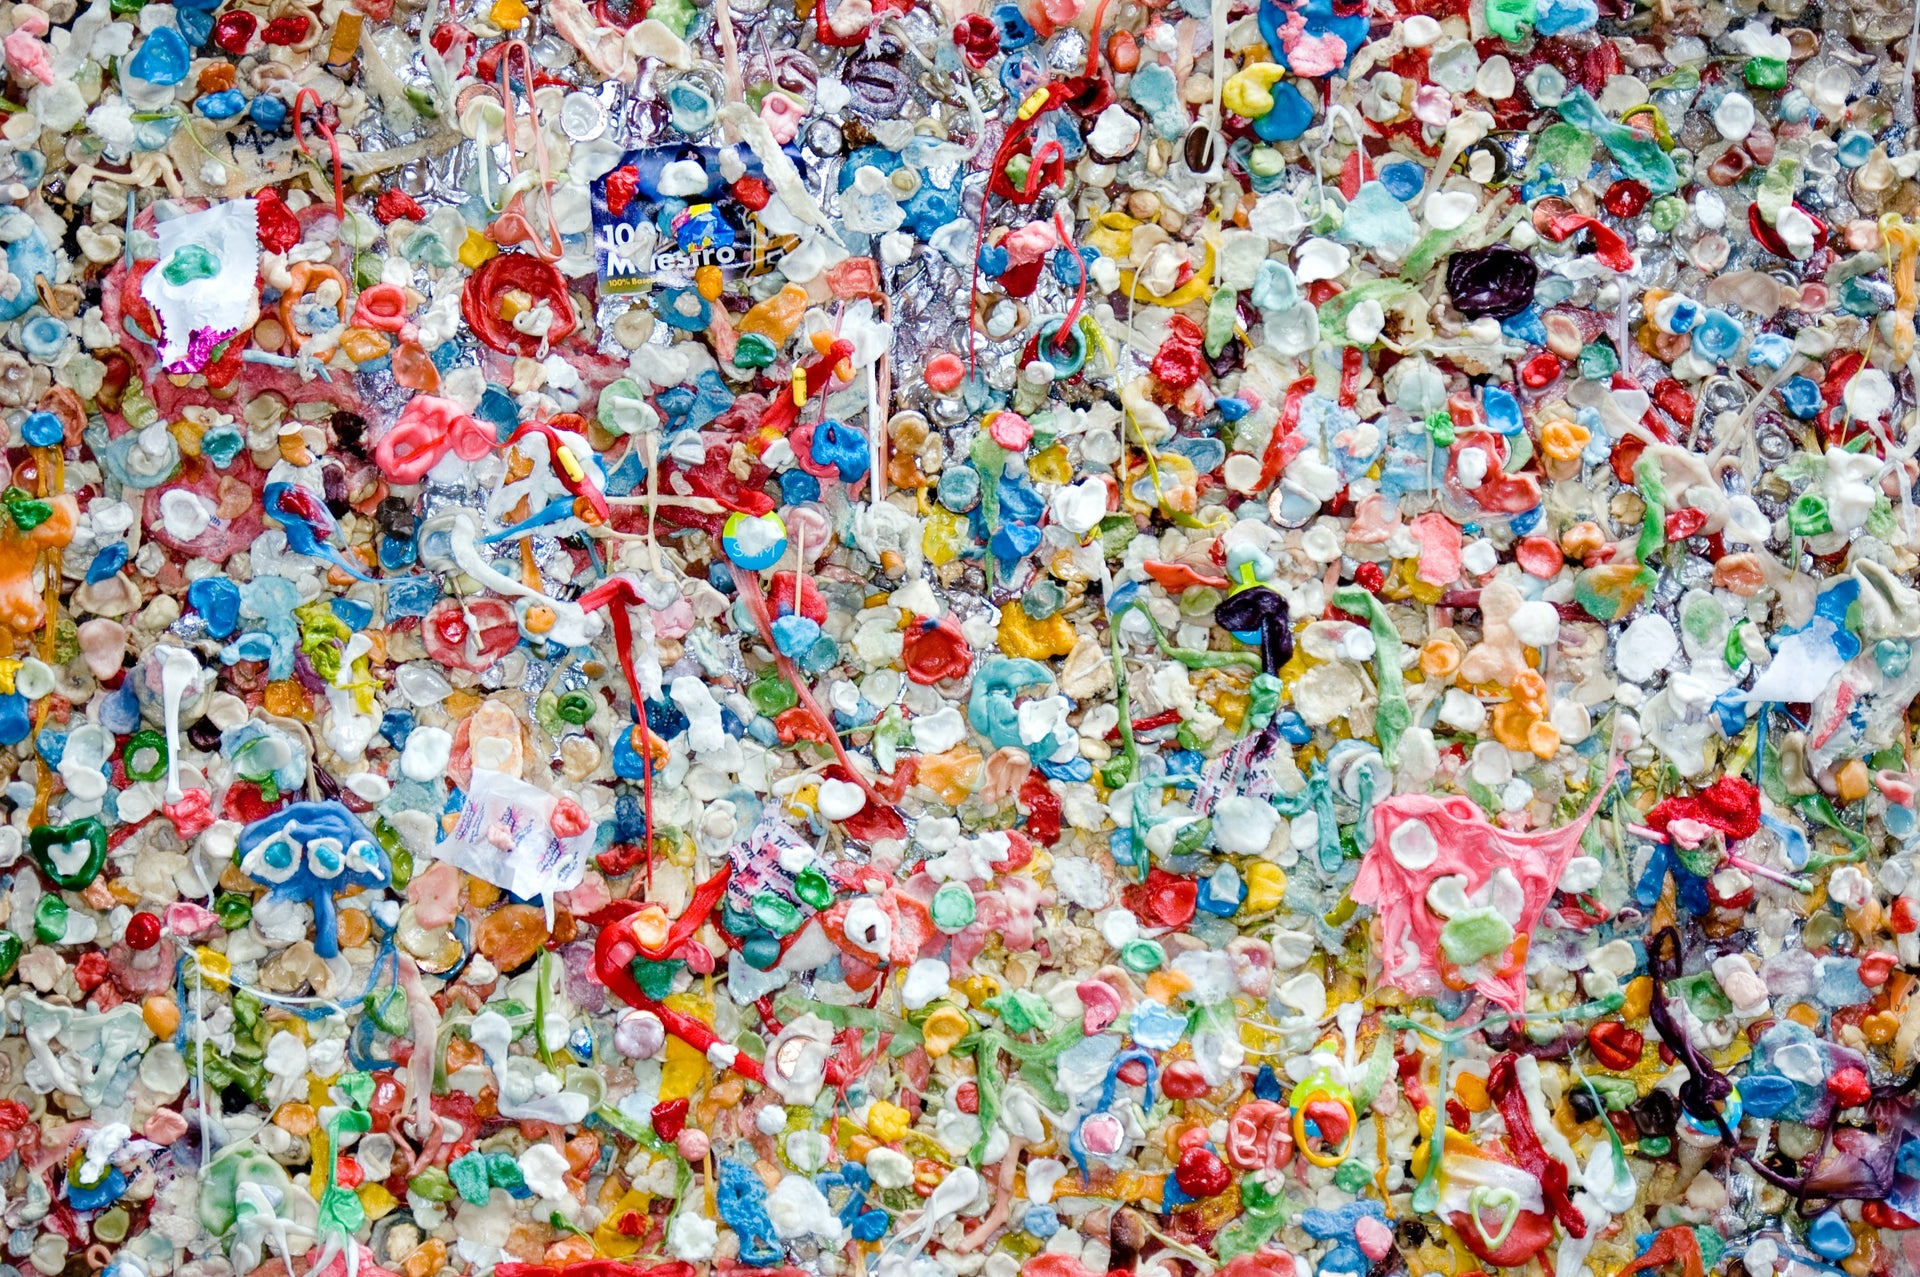 Plastic – How To Use Less And Recycle More